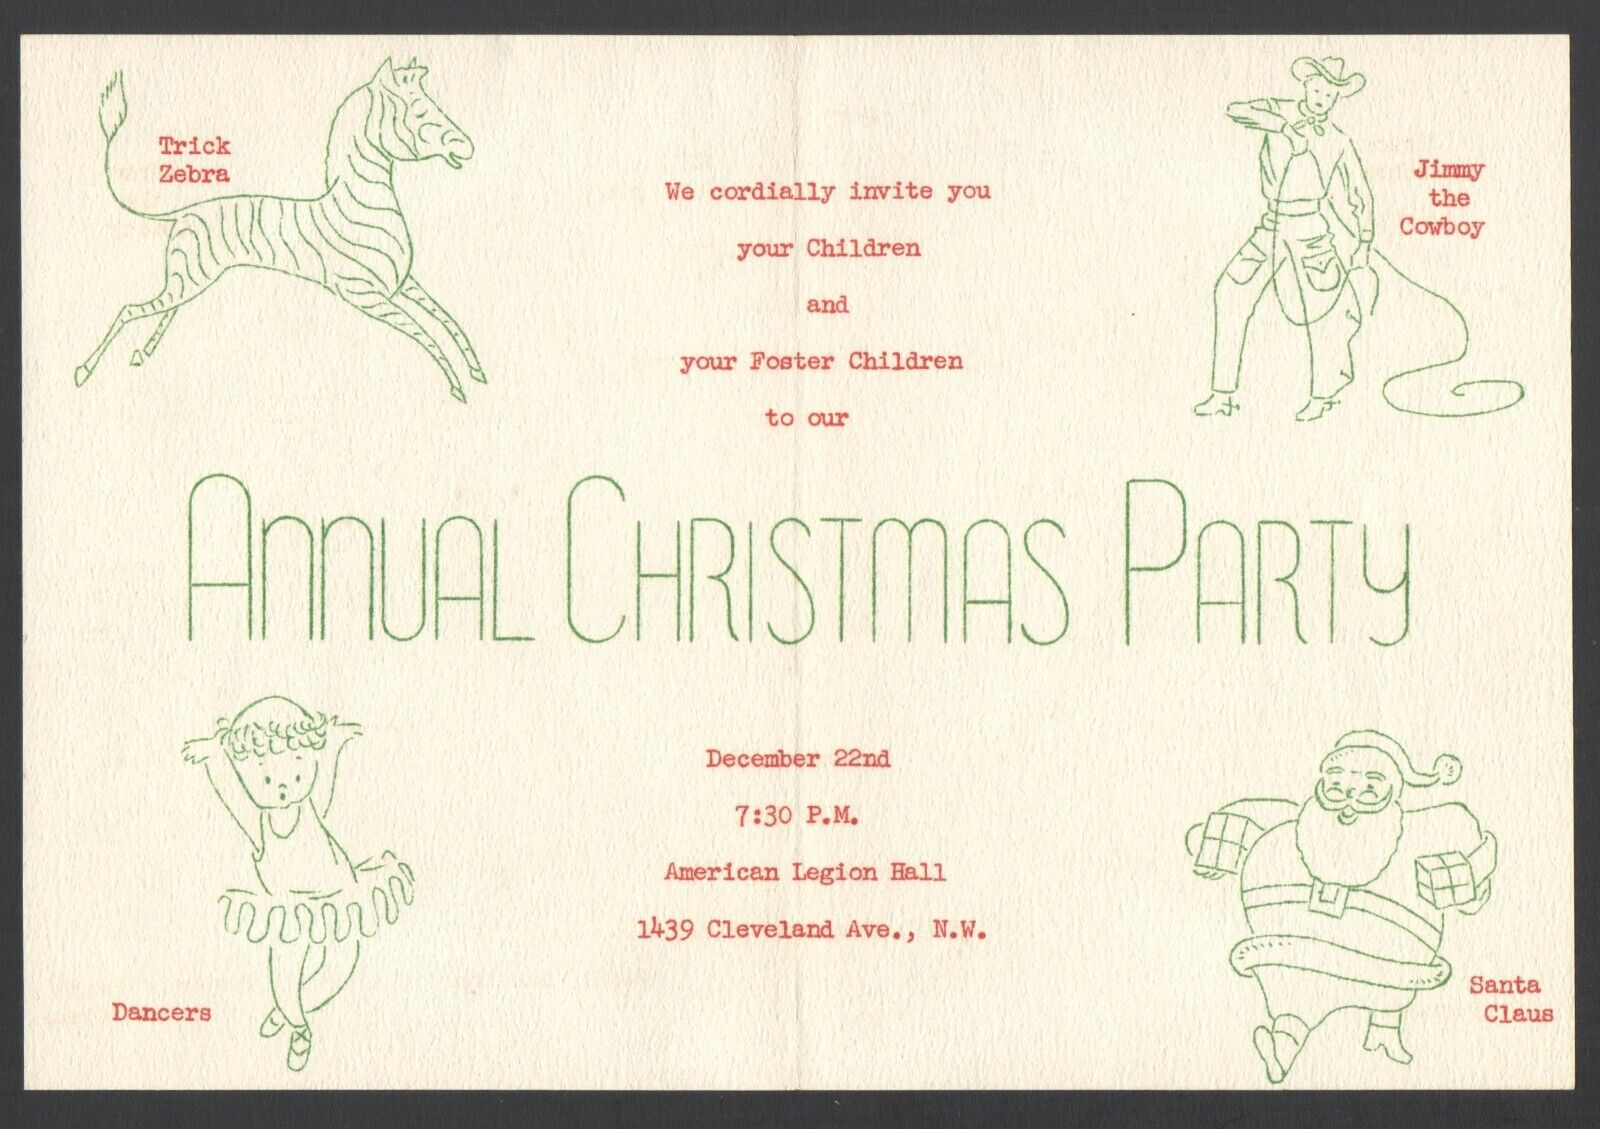 1948 Christmas Card Invitation Childrens Bureau & Family Services Annual Party